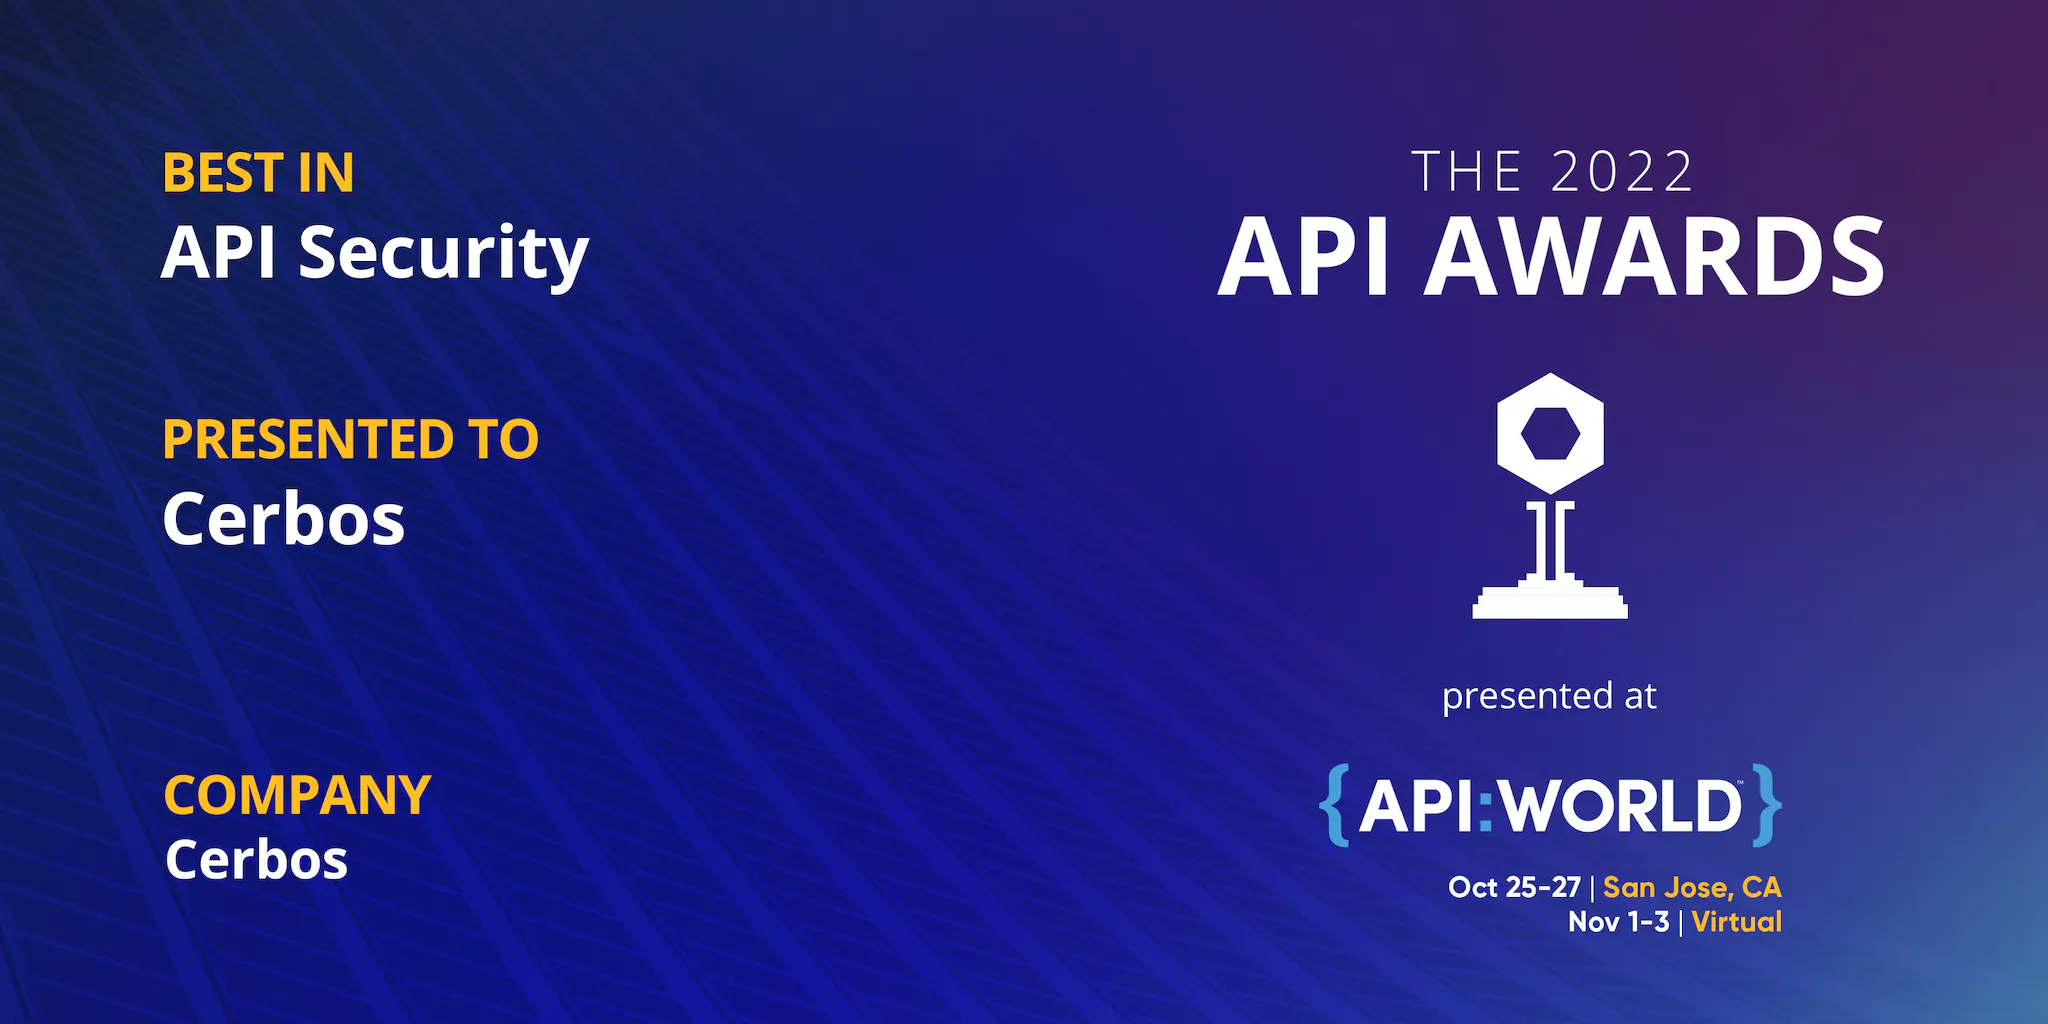 2022-10-21_cerbos-recognised-as-best-in-api-security-at-api-world-awards-2022